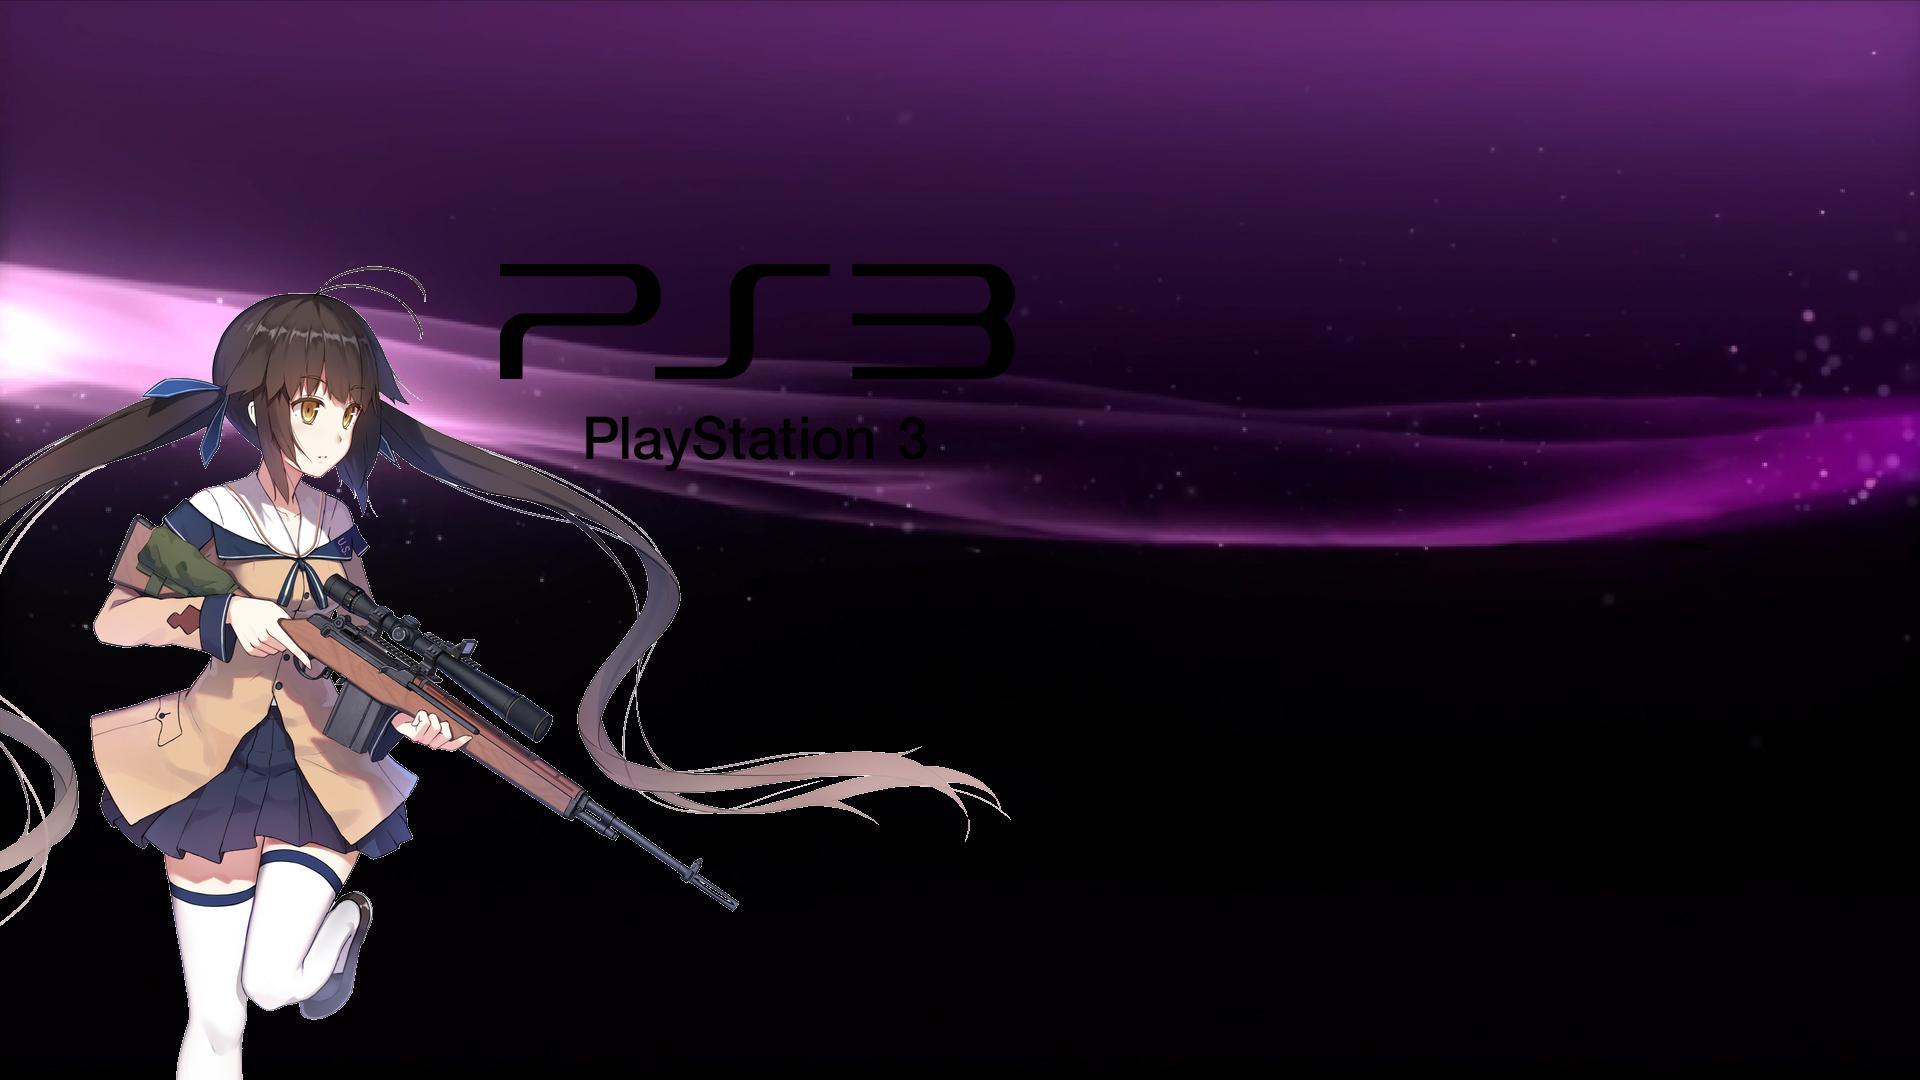 Anime Live Ps3 Wallpapers